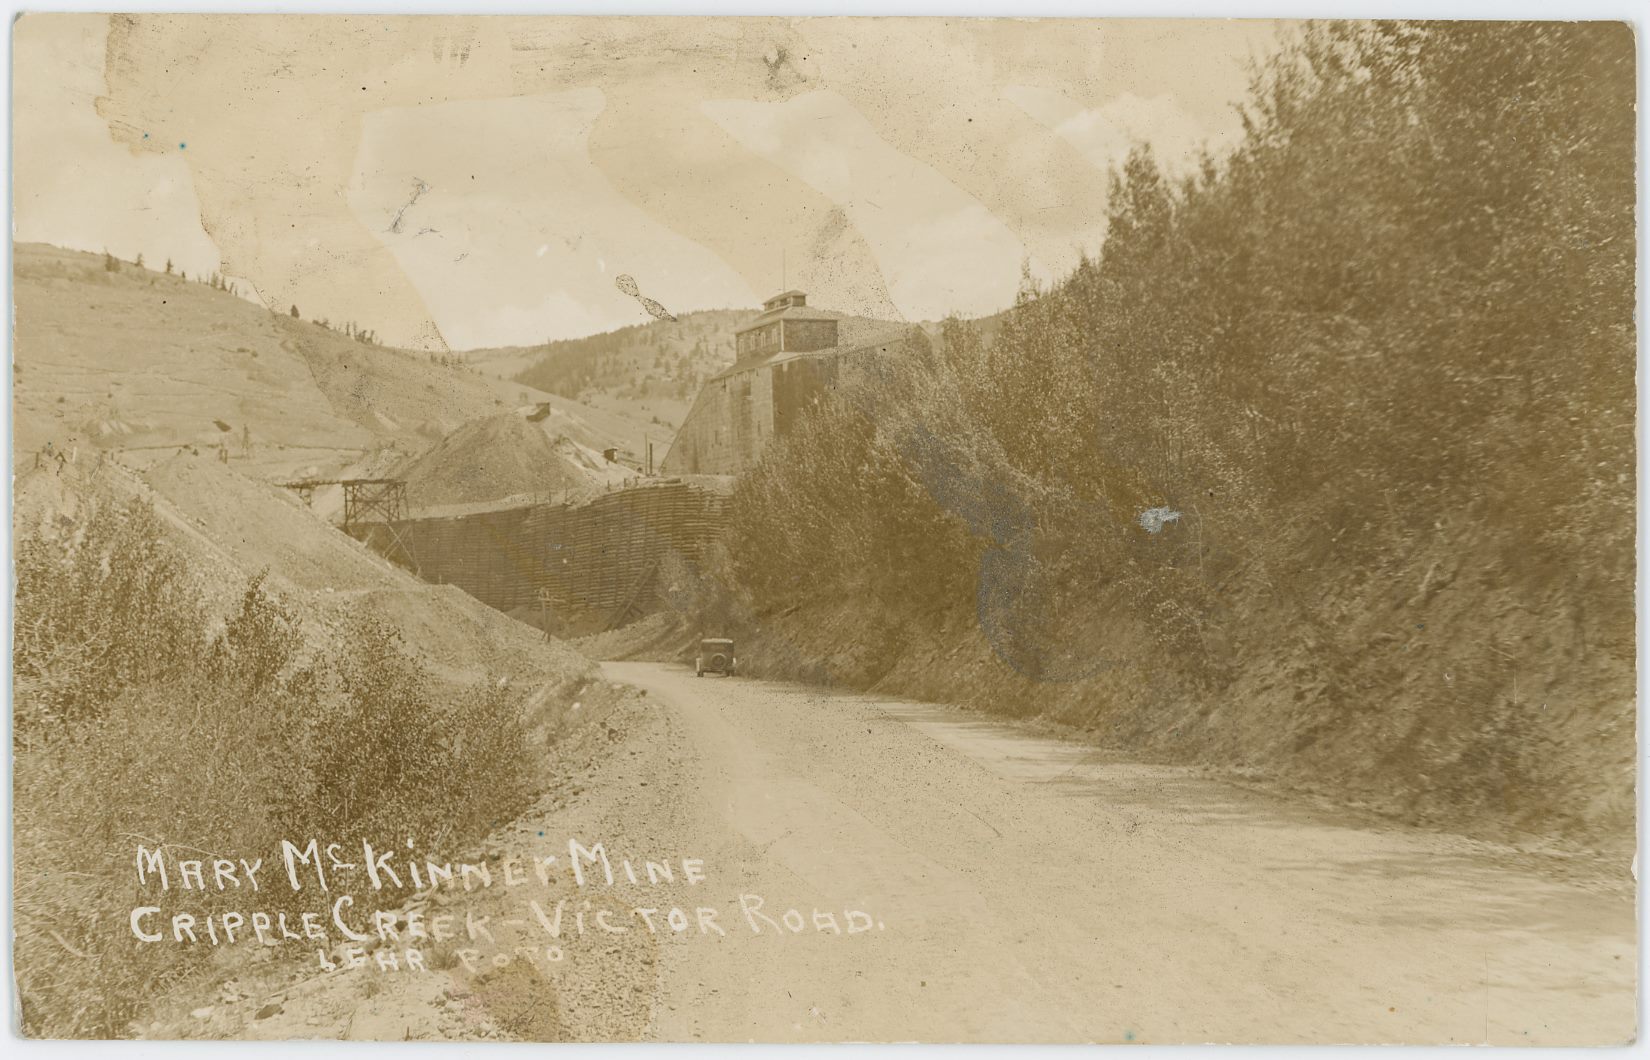 This view is from along the Victor-Cripple Creek road, running on the former roadbed of the Florence & Cripple Creek, looking towards the Mary McKinney Mine about center sideways and its huge crib-wall. If one could have walked into the view and hitched a ride with the automobile seen one would have ended up in Cripple Creek.
   The Hill in distance left-hand side is part of Gold Hill, and I wonder if part of the old Short Line roadbed is visible up there near the skyline. I can't sadly see anything though in a high-resolution scan of 1200dpi, as there is just too much blur, and overall the whole card is sadly not in a good shape due to someone at some time in the past having spilled something over it.